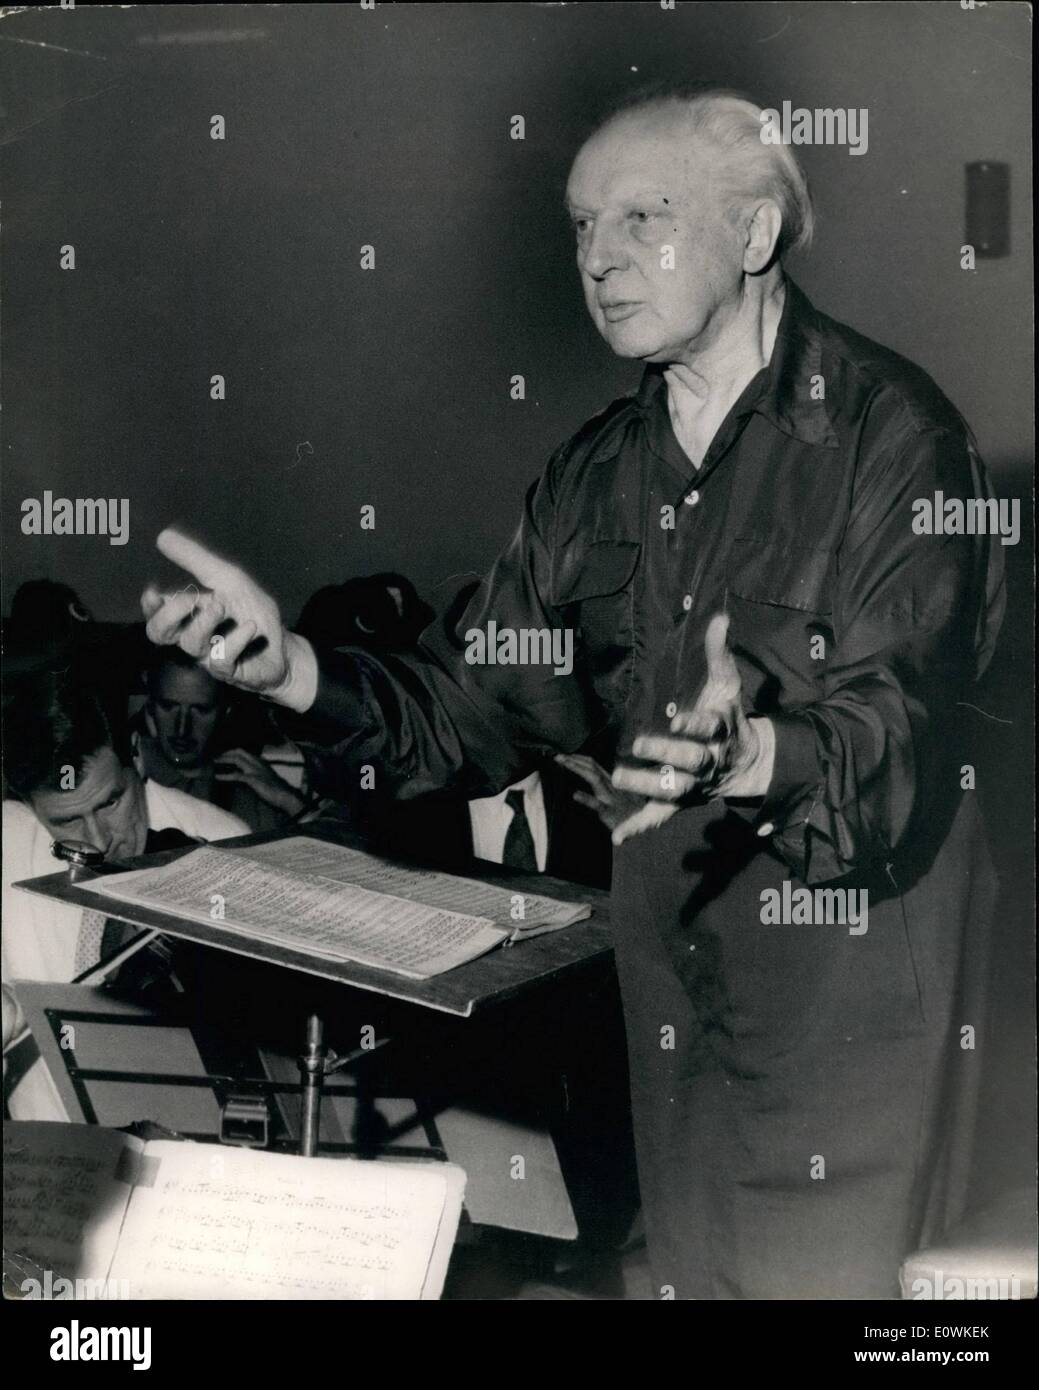 Jul. 07, 1963 - Leopold Stokowski Rehearses For Promenade Concerts: World  famous conductor - eighty one year old Leopold Stokowski was to be seen at  the St. Panoras Town Hall this morning 